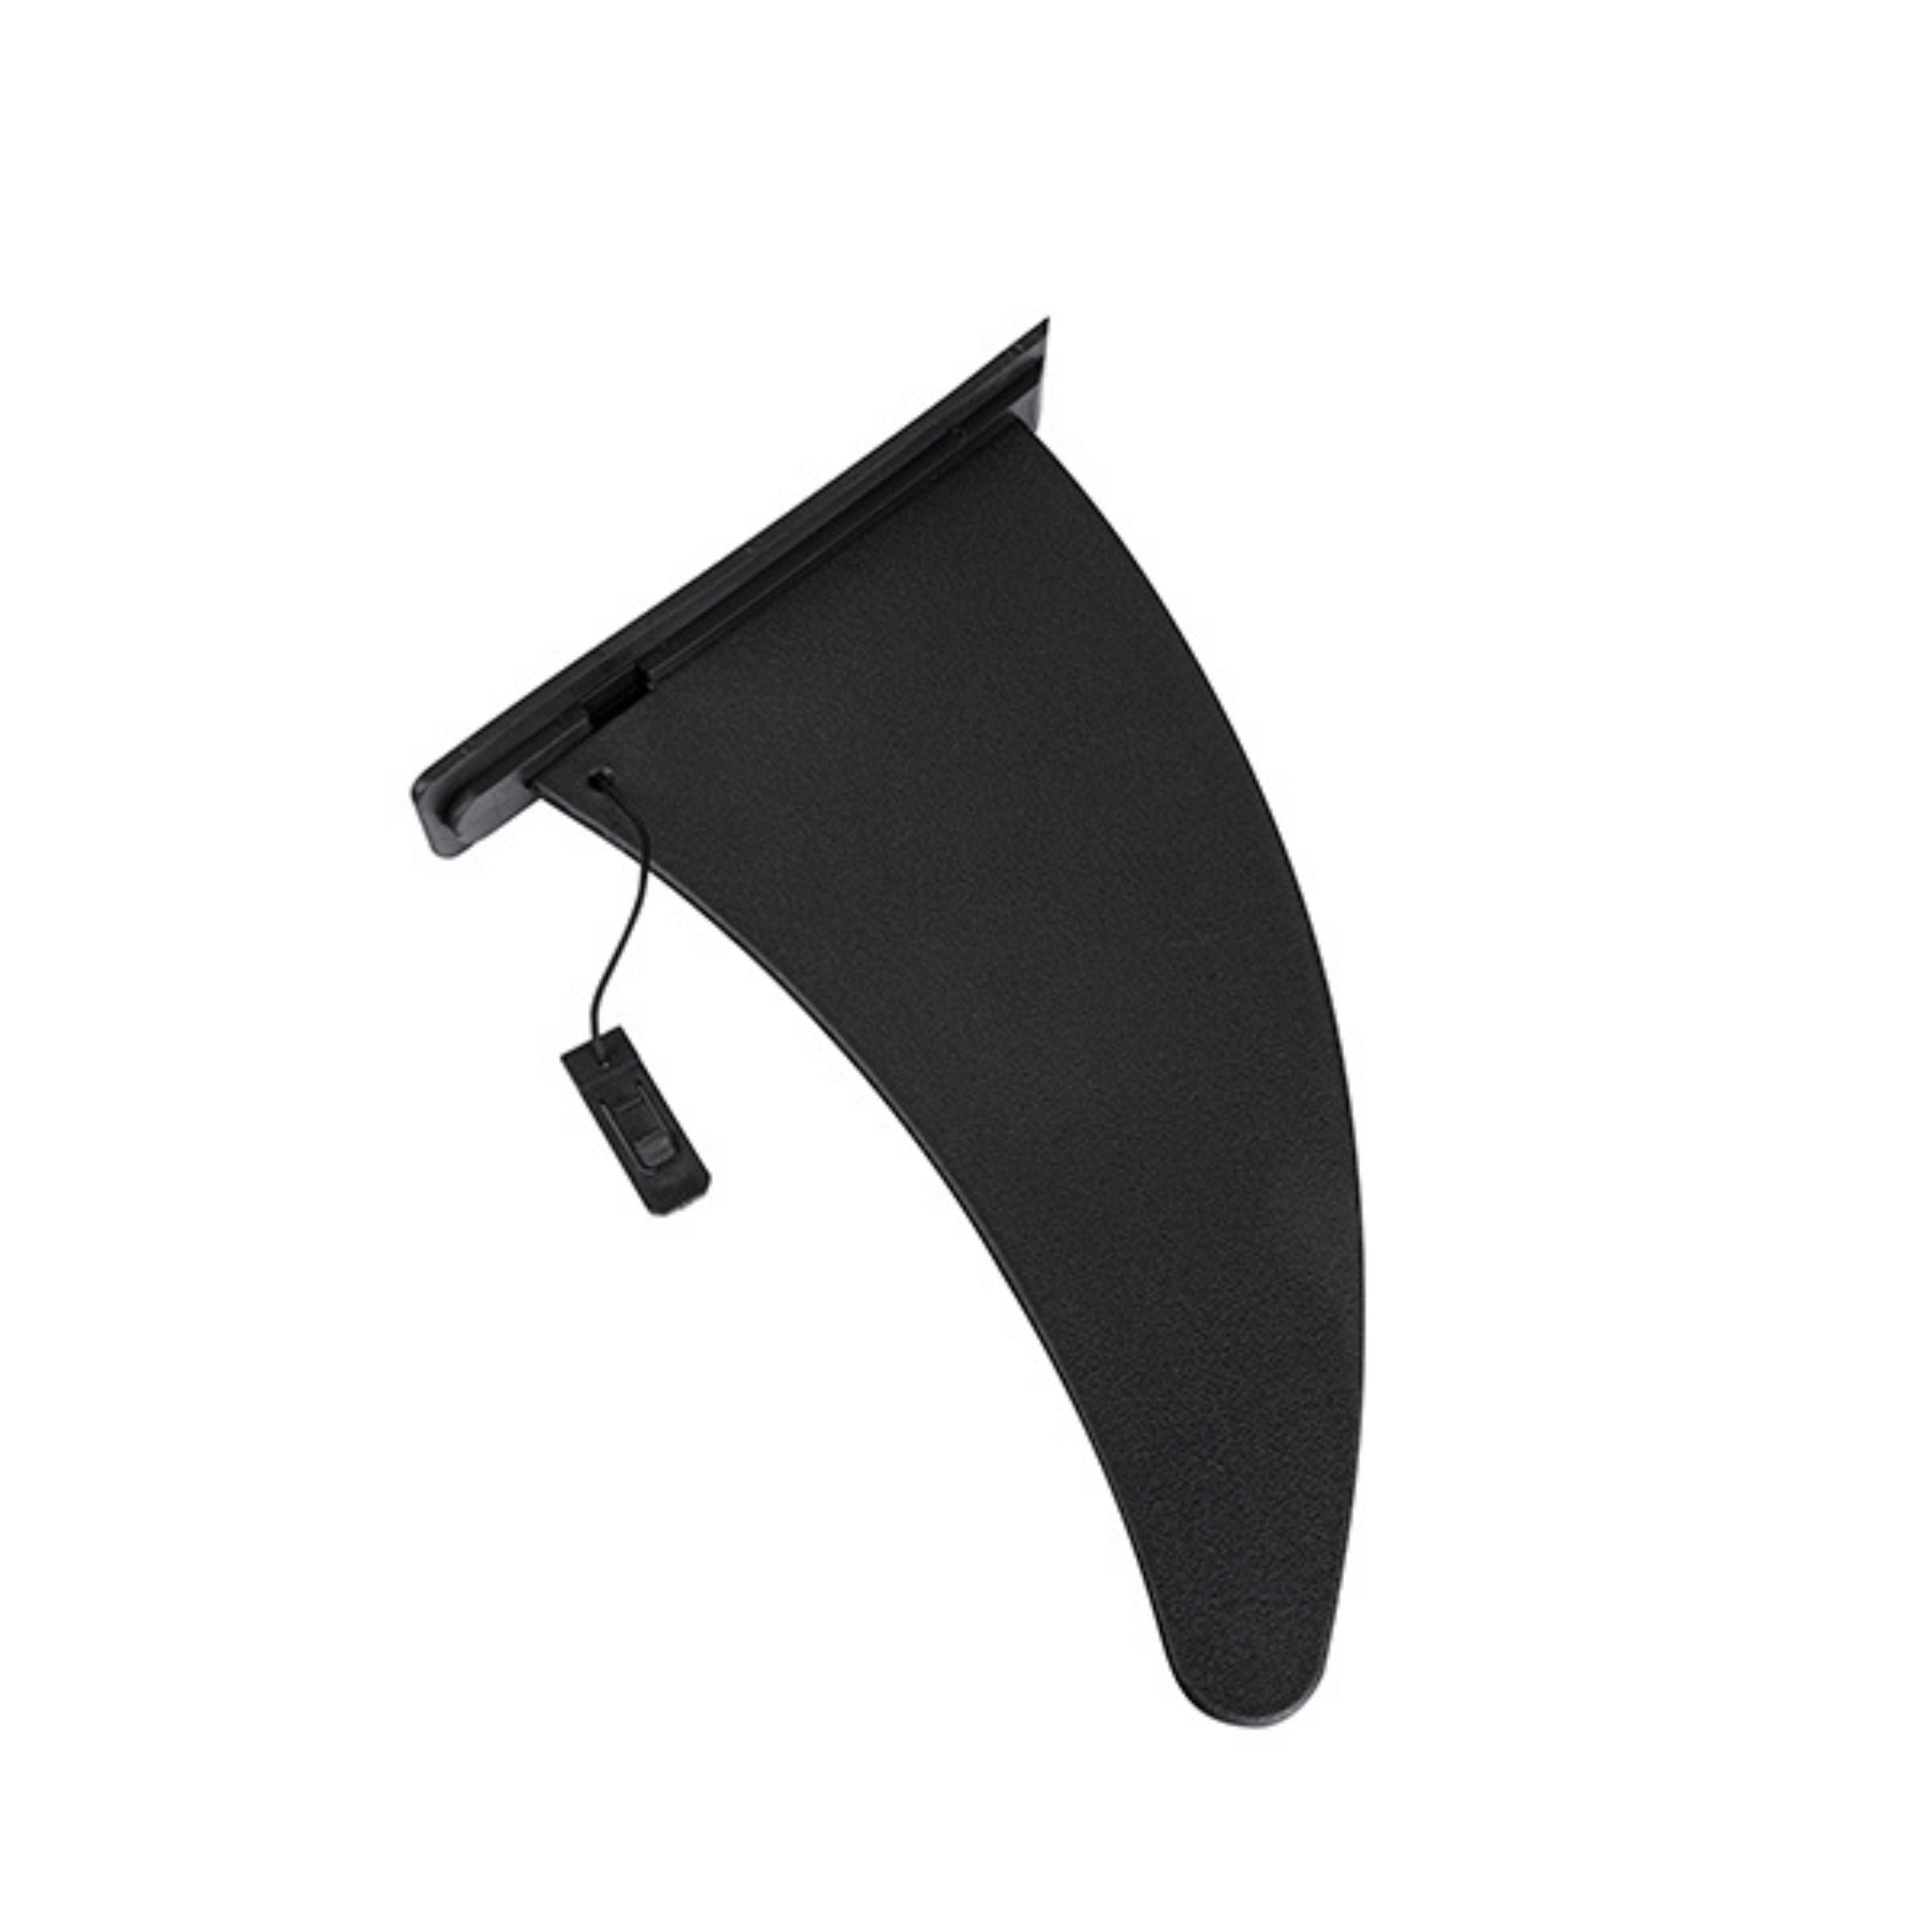 Aileron de remplacement "Jaws"||"Jaws" Replacement fin